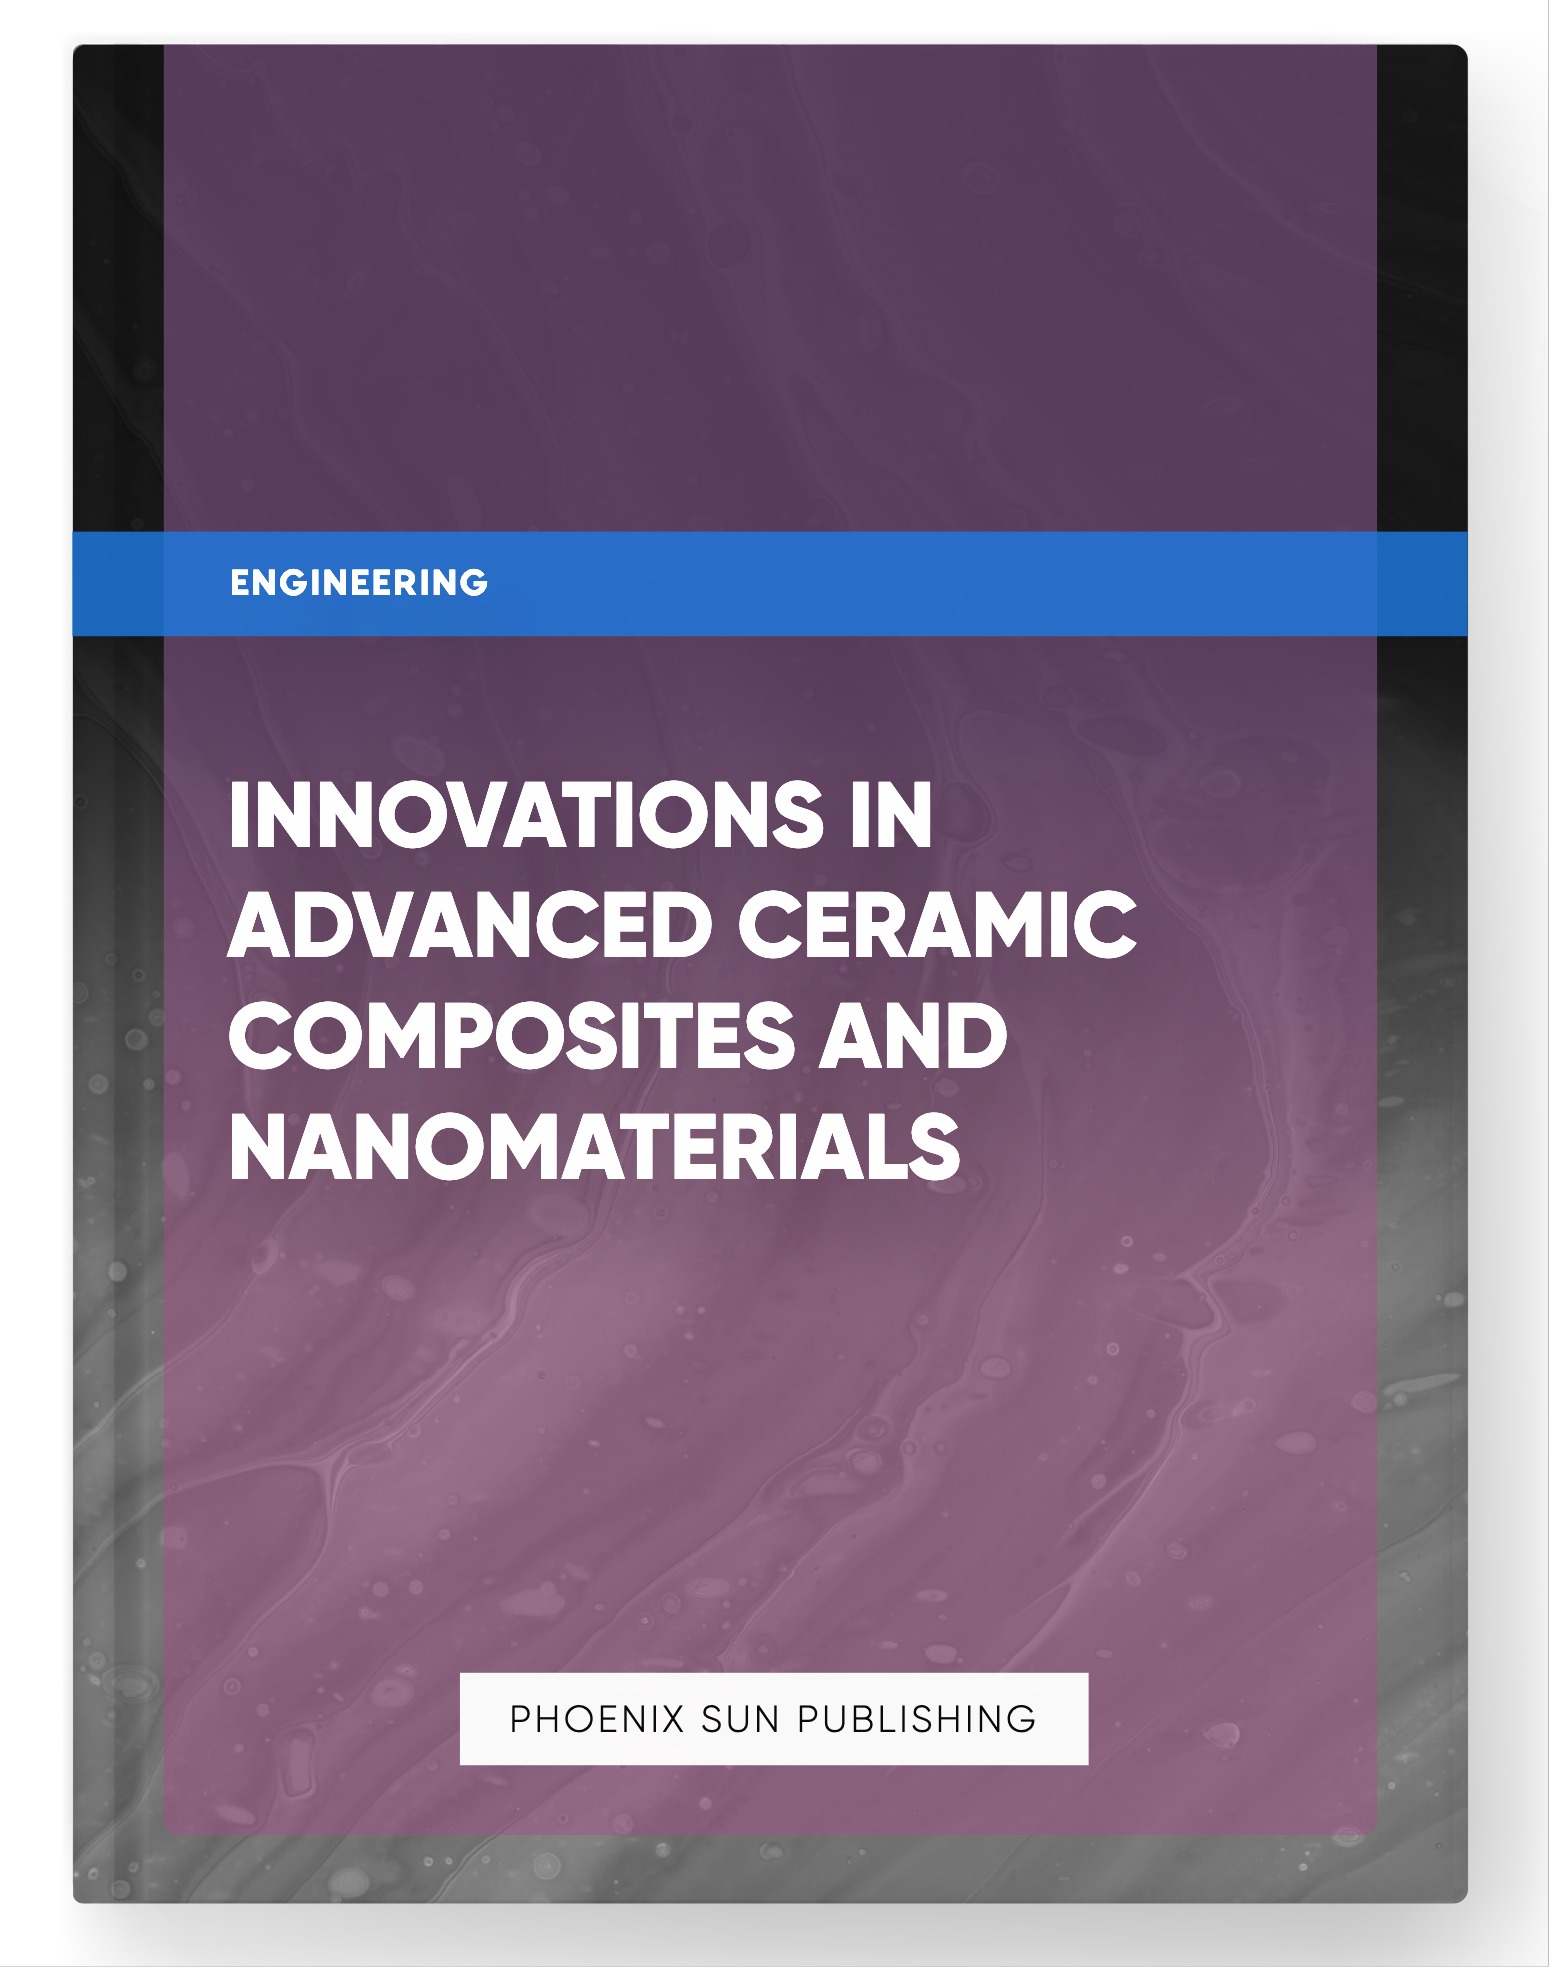 Innovations in Advanced Ceramic Composites and Nanomaterials